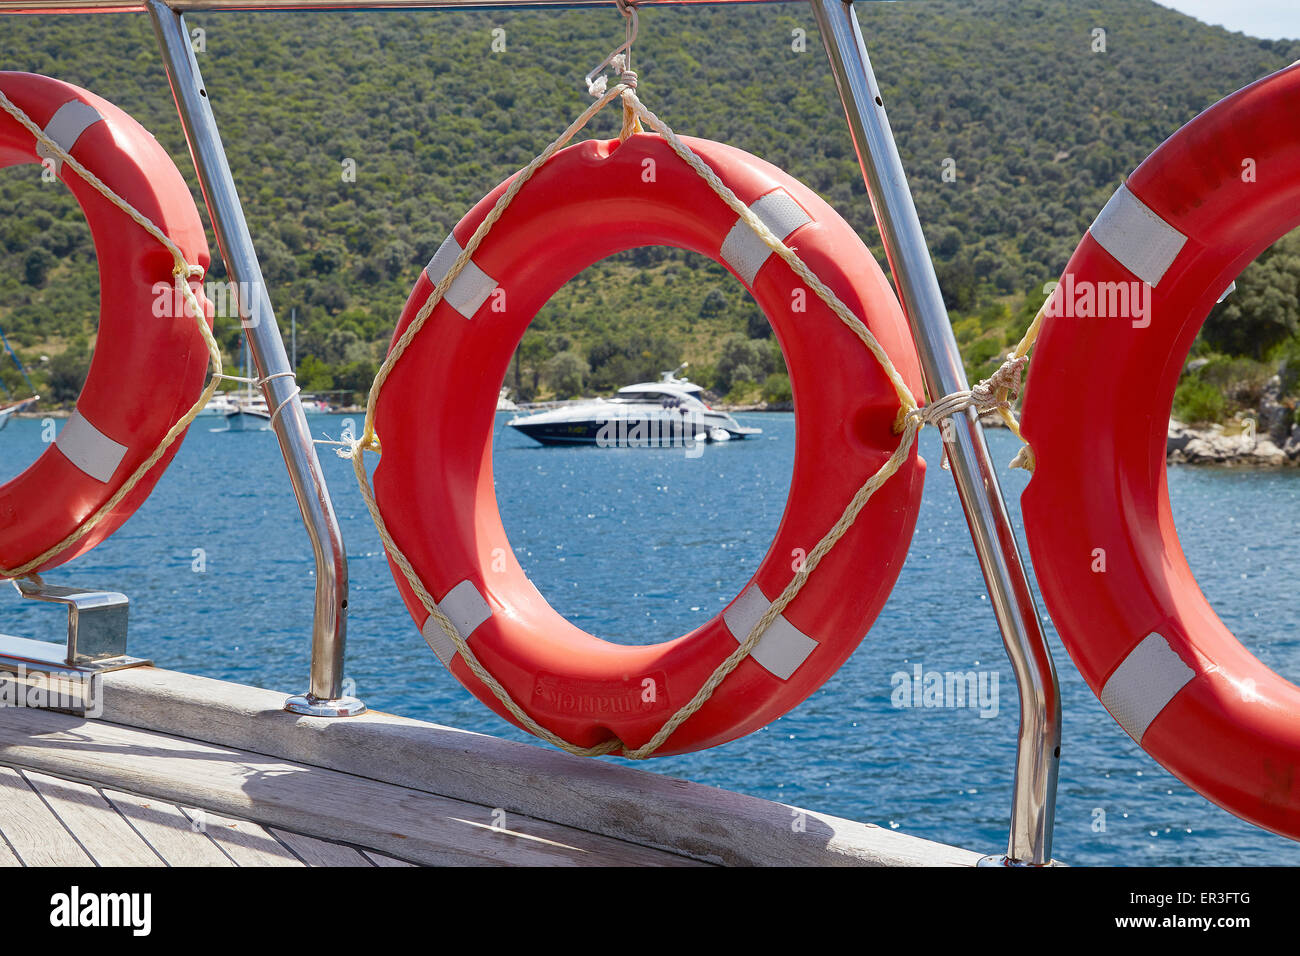 A lifebuoy safety ring on board a boat sailing out of Fethiye, Turkey Stock Photo